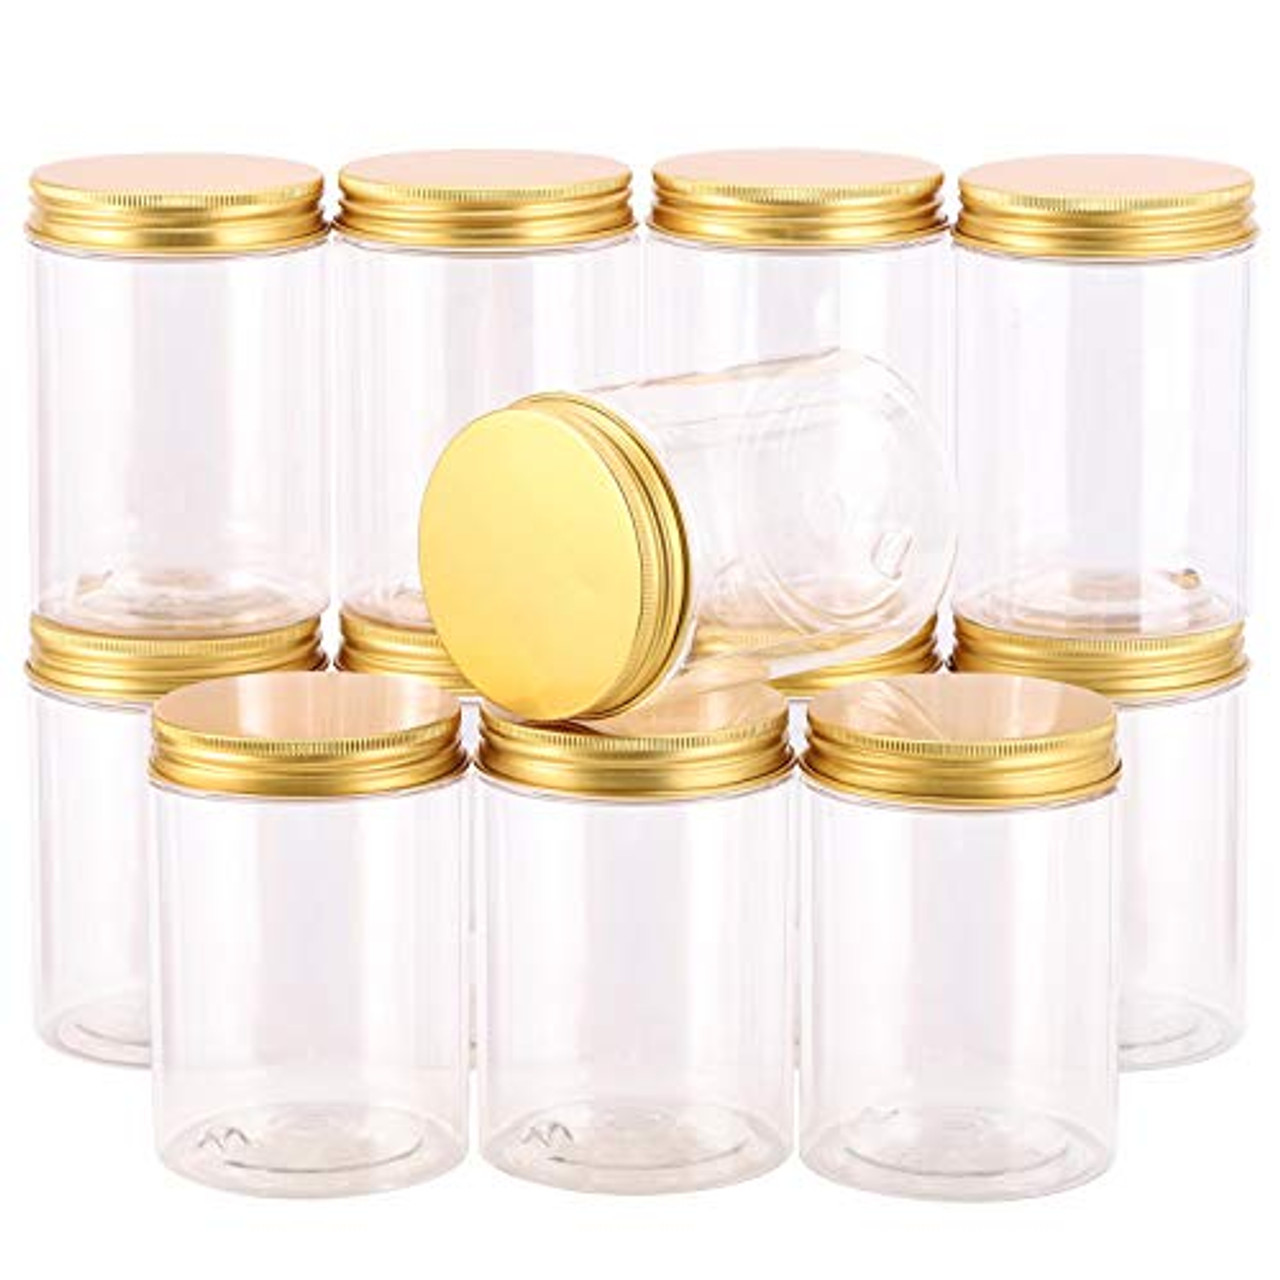 Clear Plastic Jars 8 ounce with Black Lids (9-Pack) Refillable